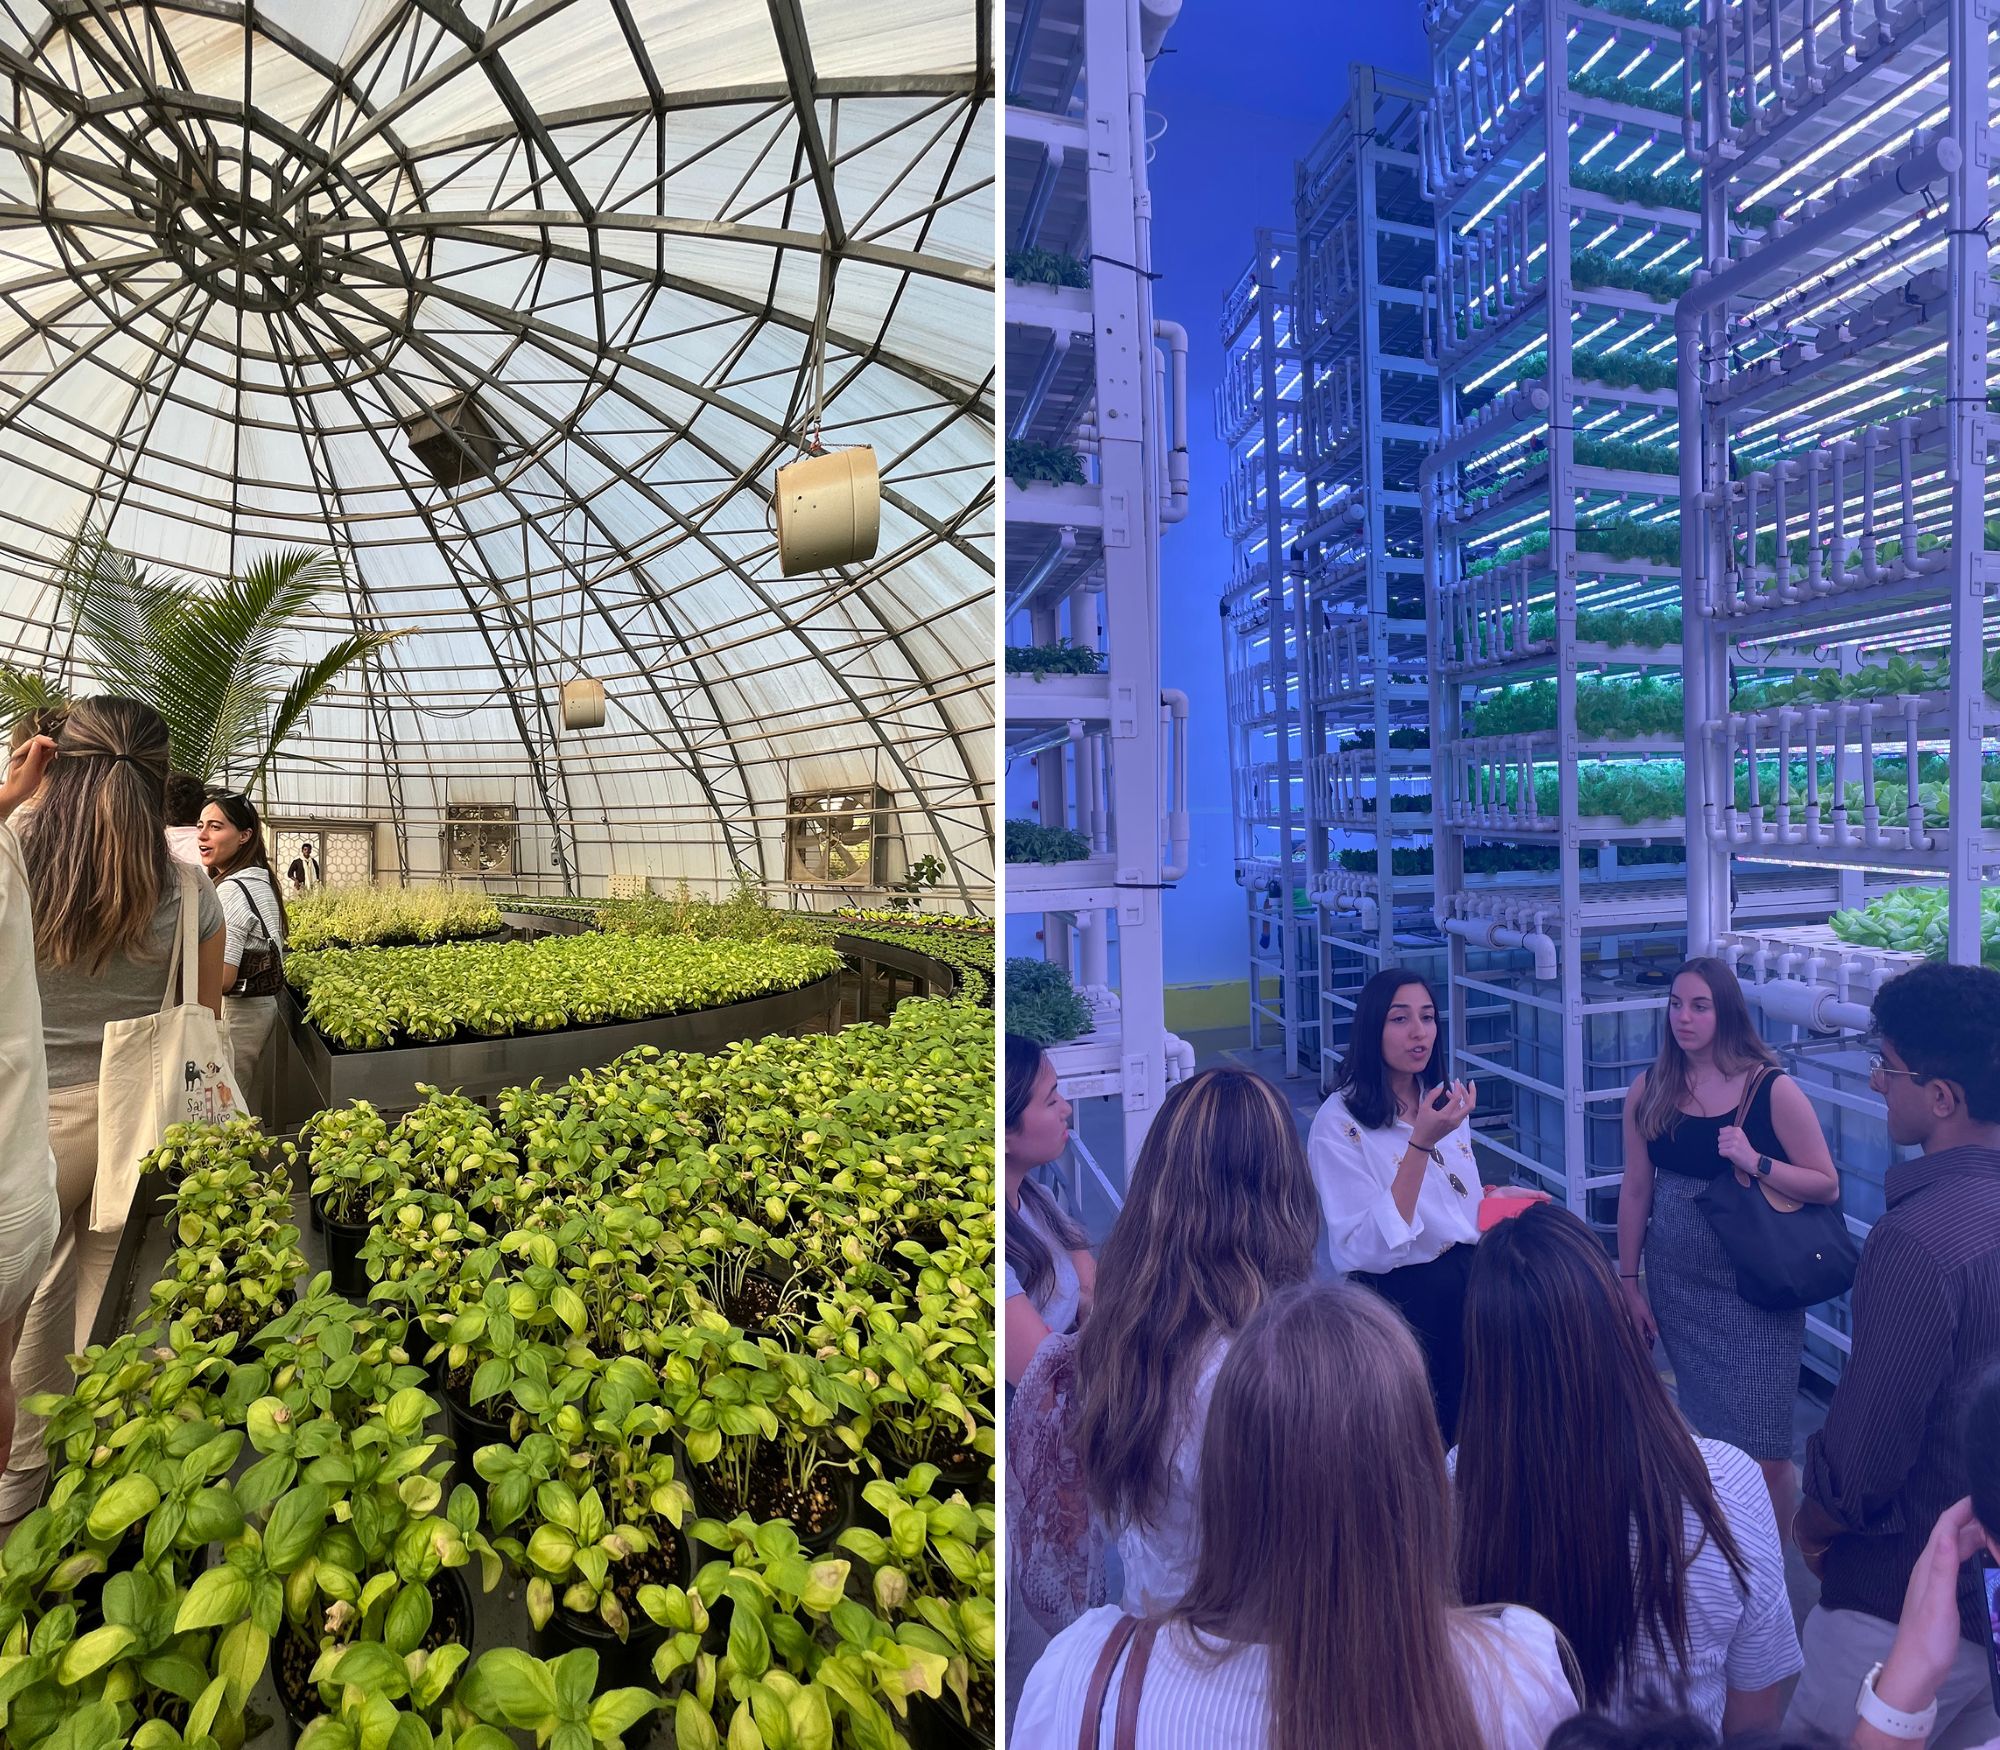 Left, a greenhouse dome with many plants growing. Right, a group of students in a greenhouse with vertical stacks of greens growing.